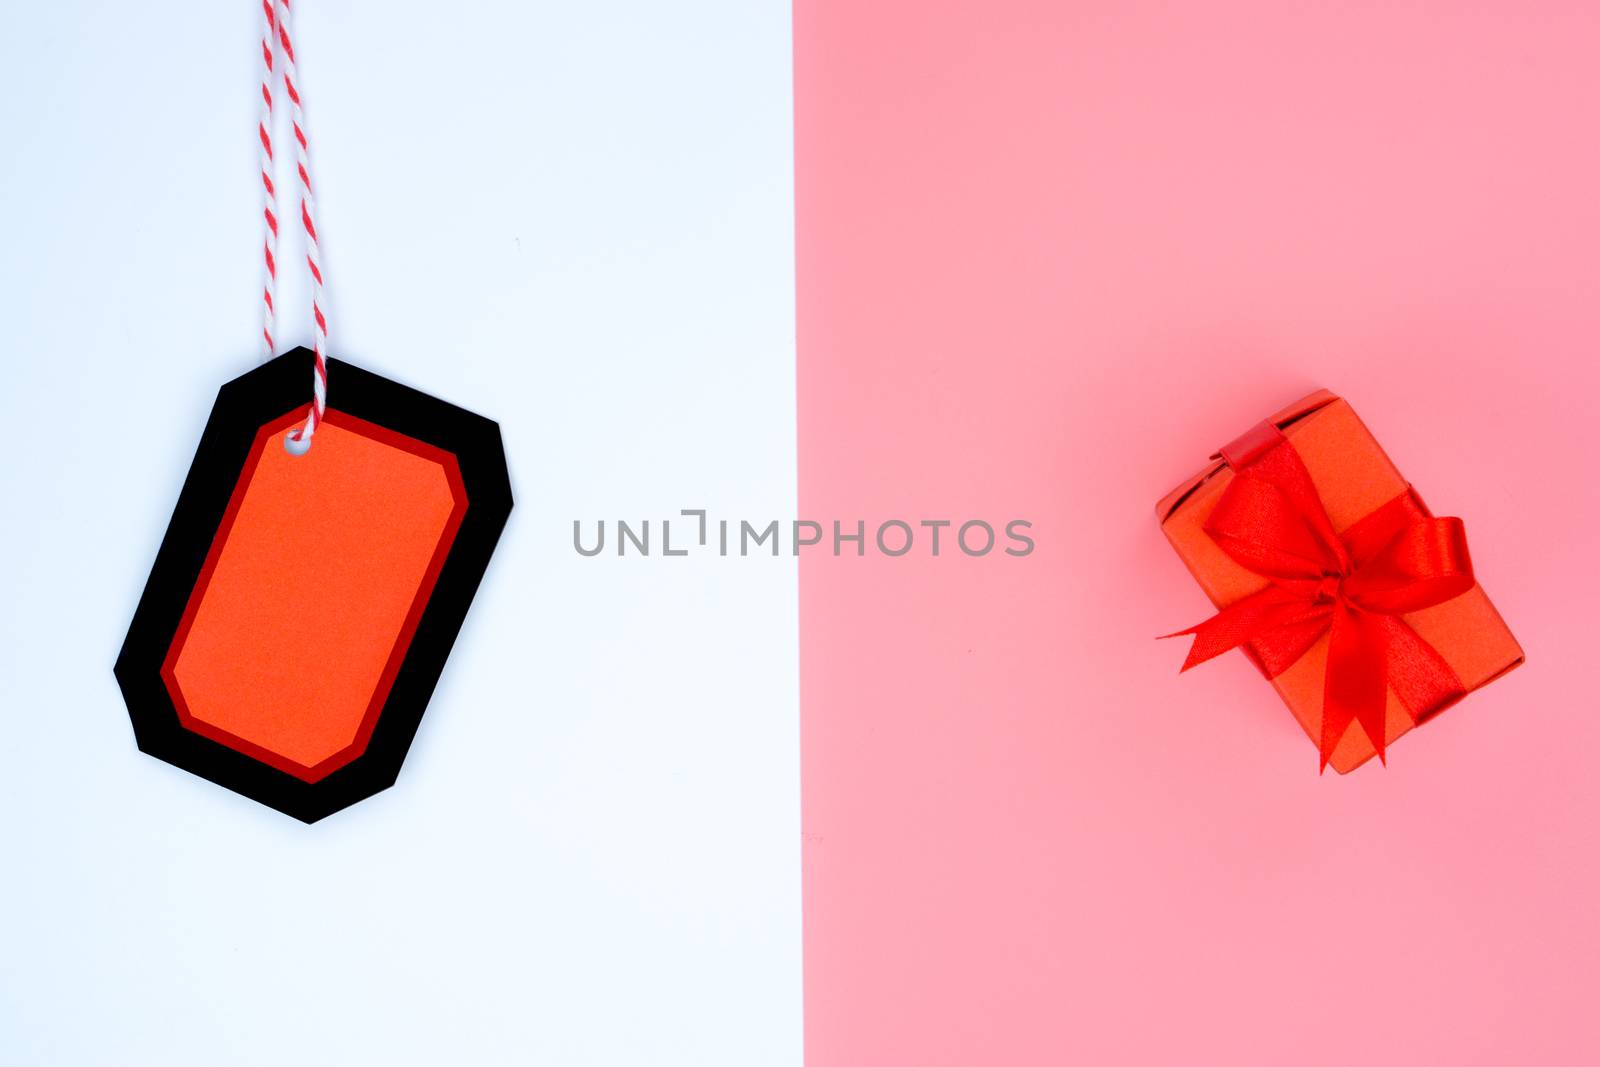 Online shopping of China, The shopping boxes with red rope and shopping tag on a white and pink background with copy space for text. 11.11 single's day sale concept